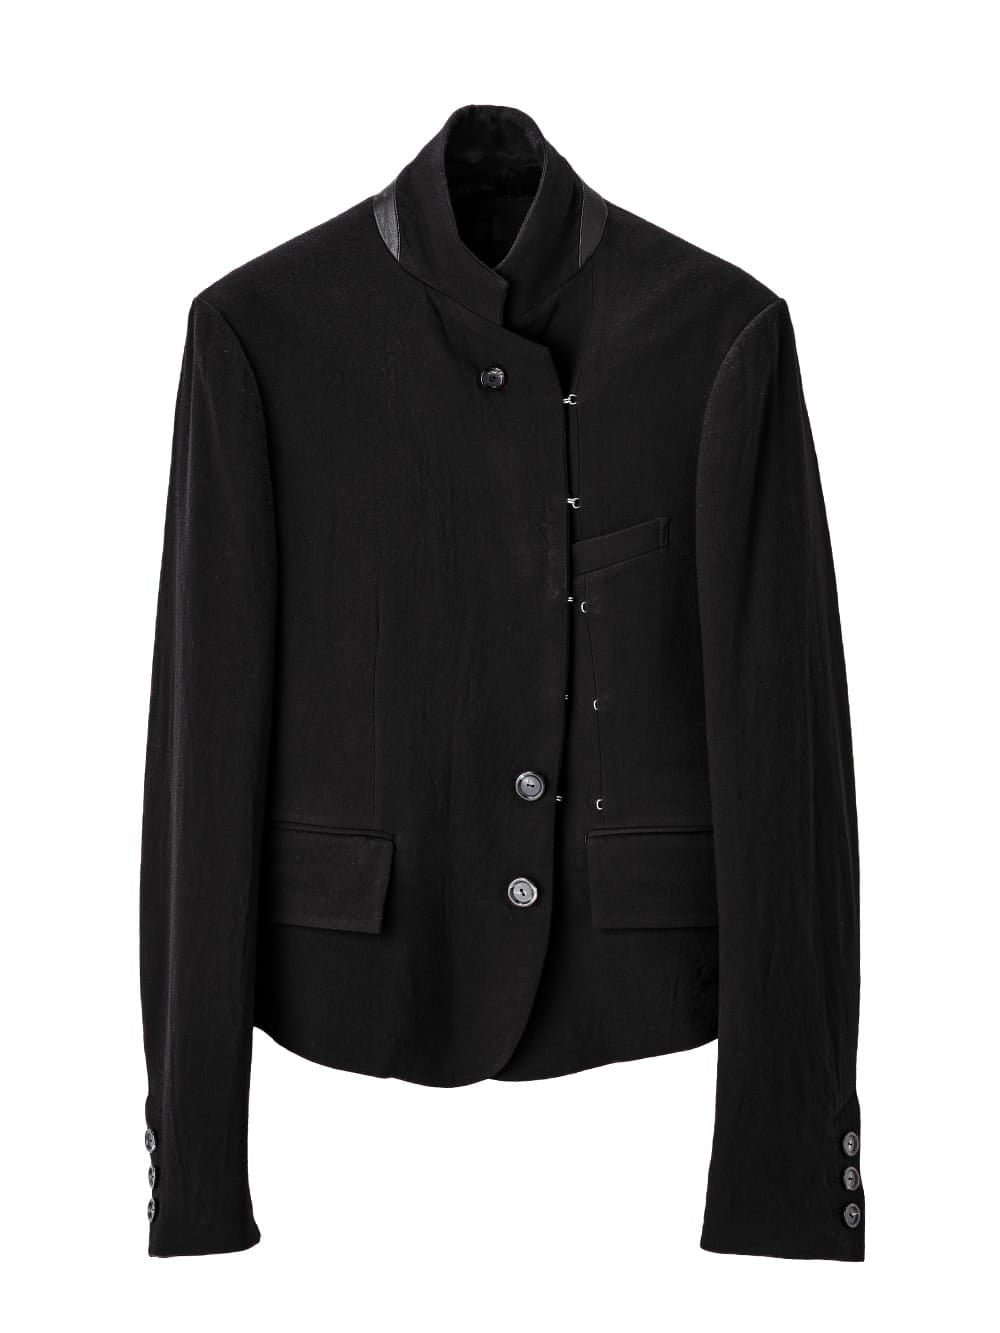 sj.0003bAW23-black right - left cropped jacket. THE TWO OF US 2023 